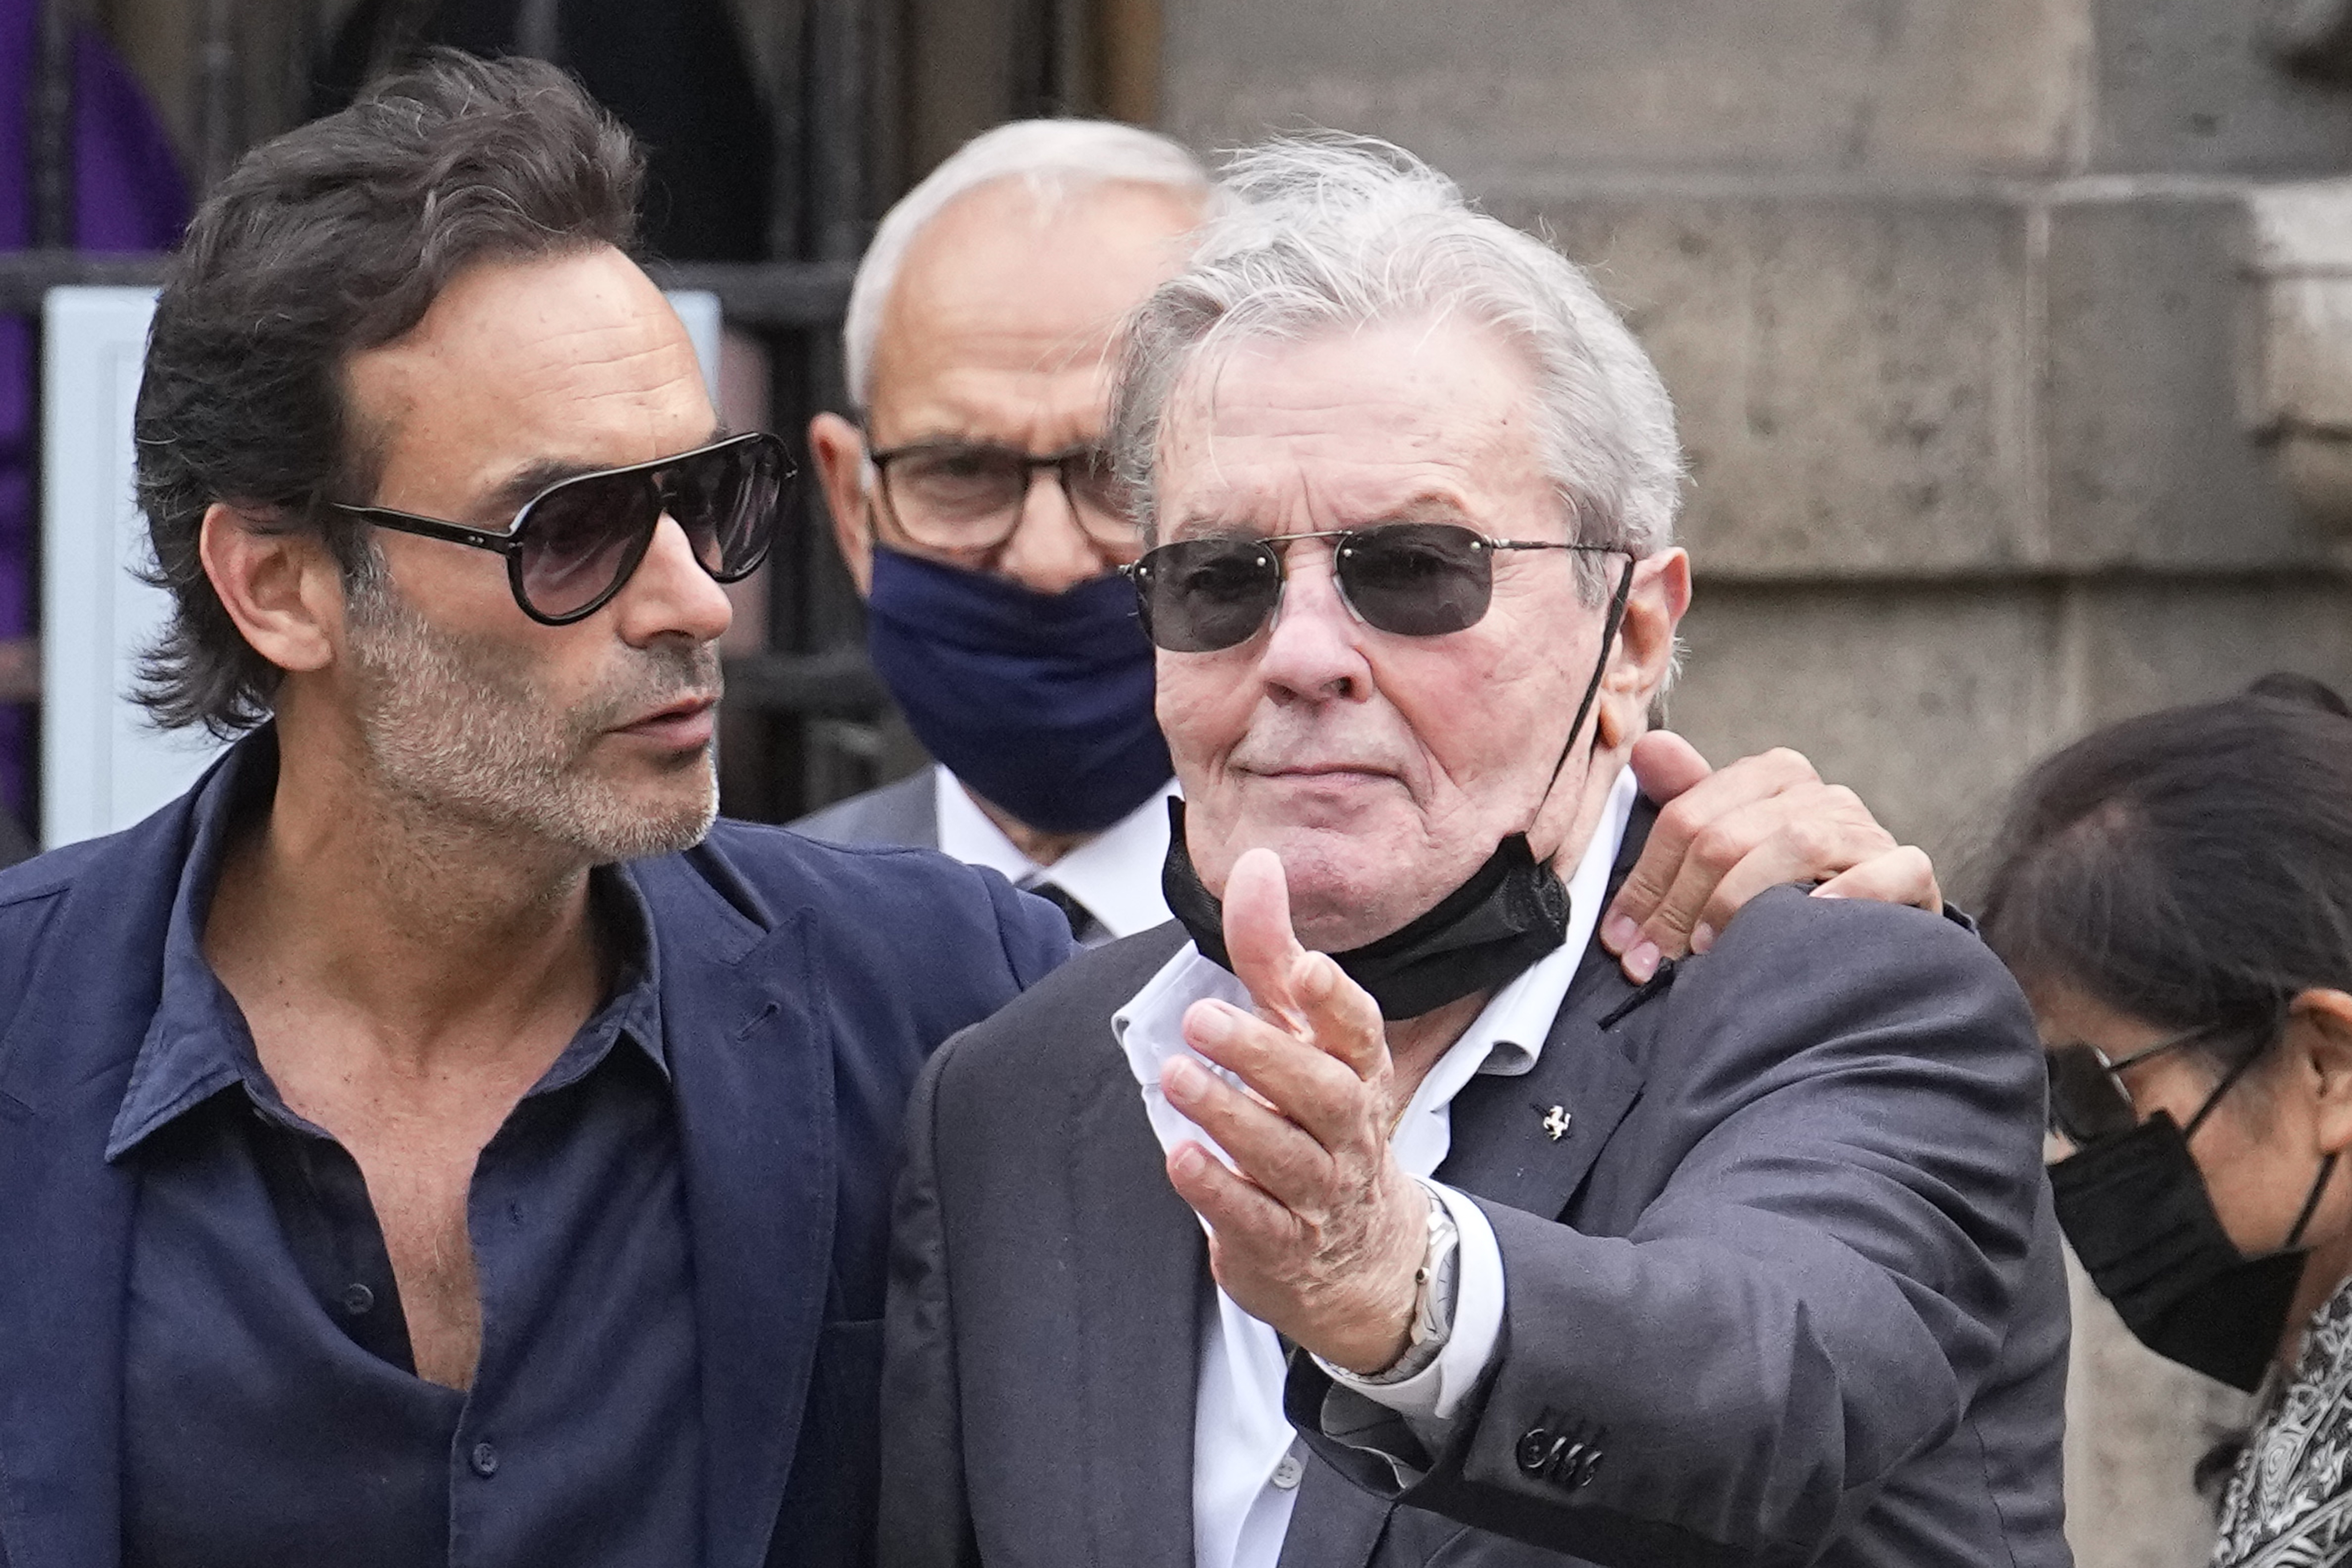 French actor Alain Delon and his son Anthony Delon, left, arrive at the Saint Germain des Près church to attend Jean-Paul Belmondo's funeral service, Friday, Sept. 10, 2021 in Paris. The star of the iconic French New Wave film "Breathless" died Monday aged 88. (AP Photo/Michel Euler)